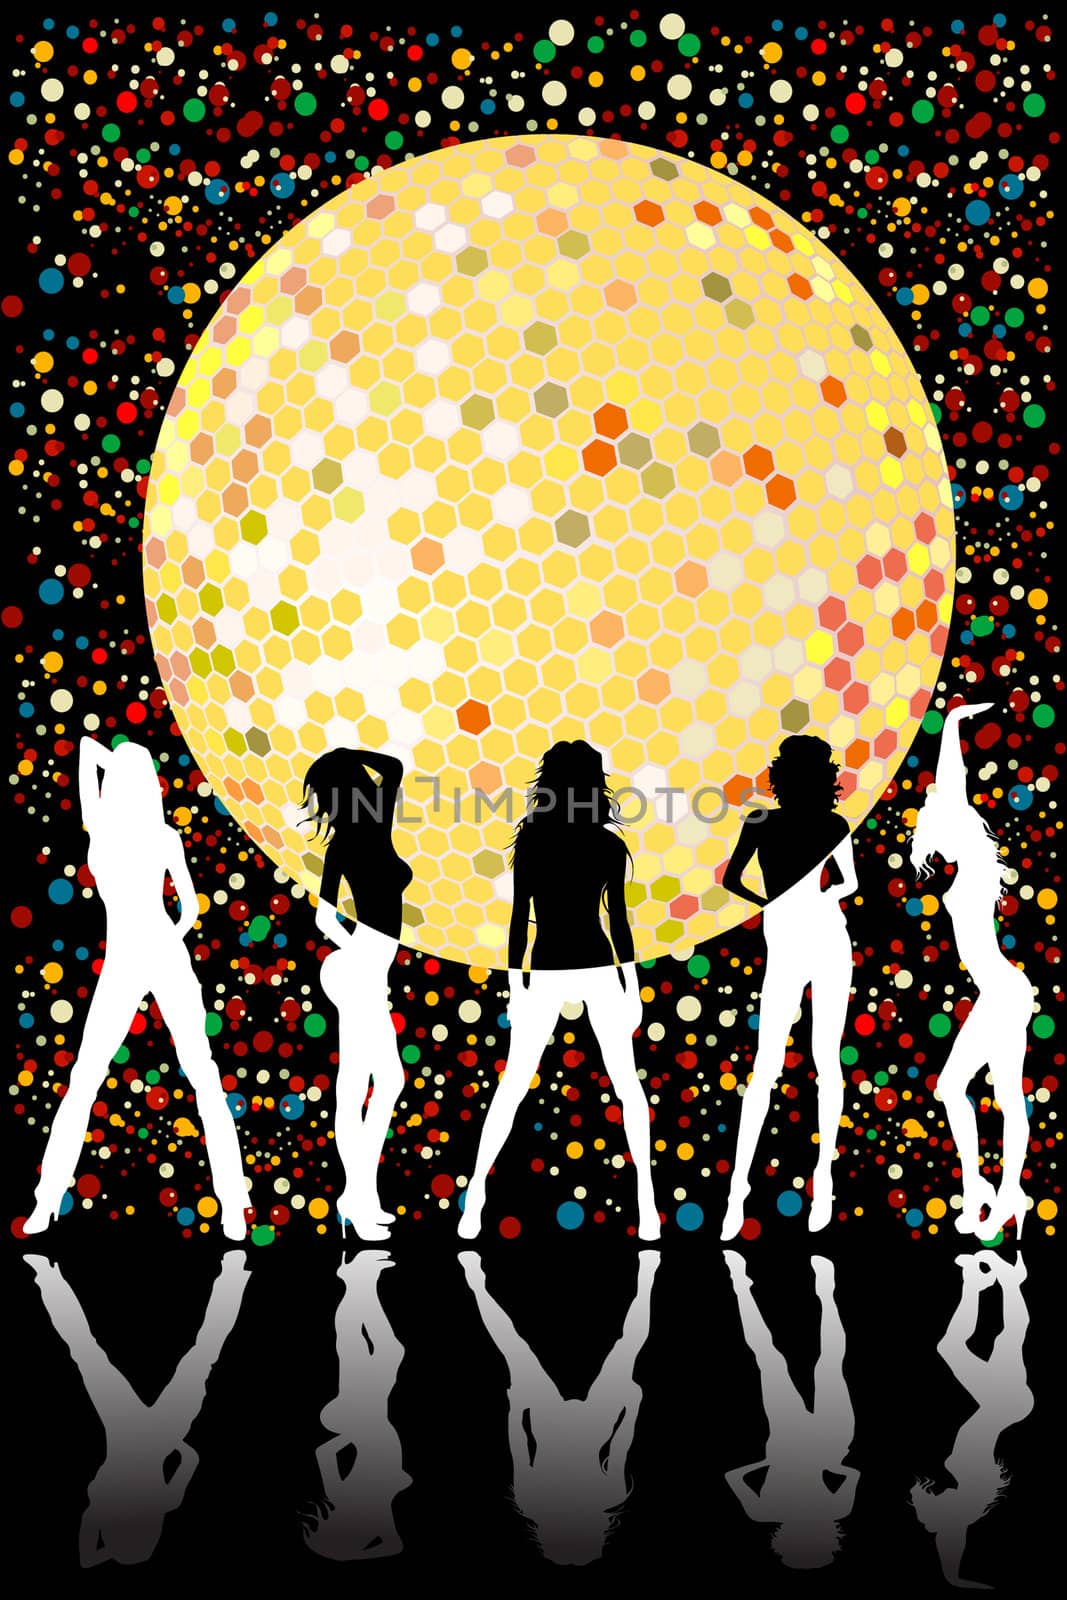 Disco party design by Lirch